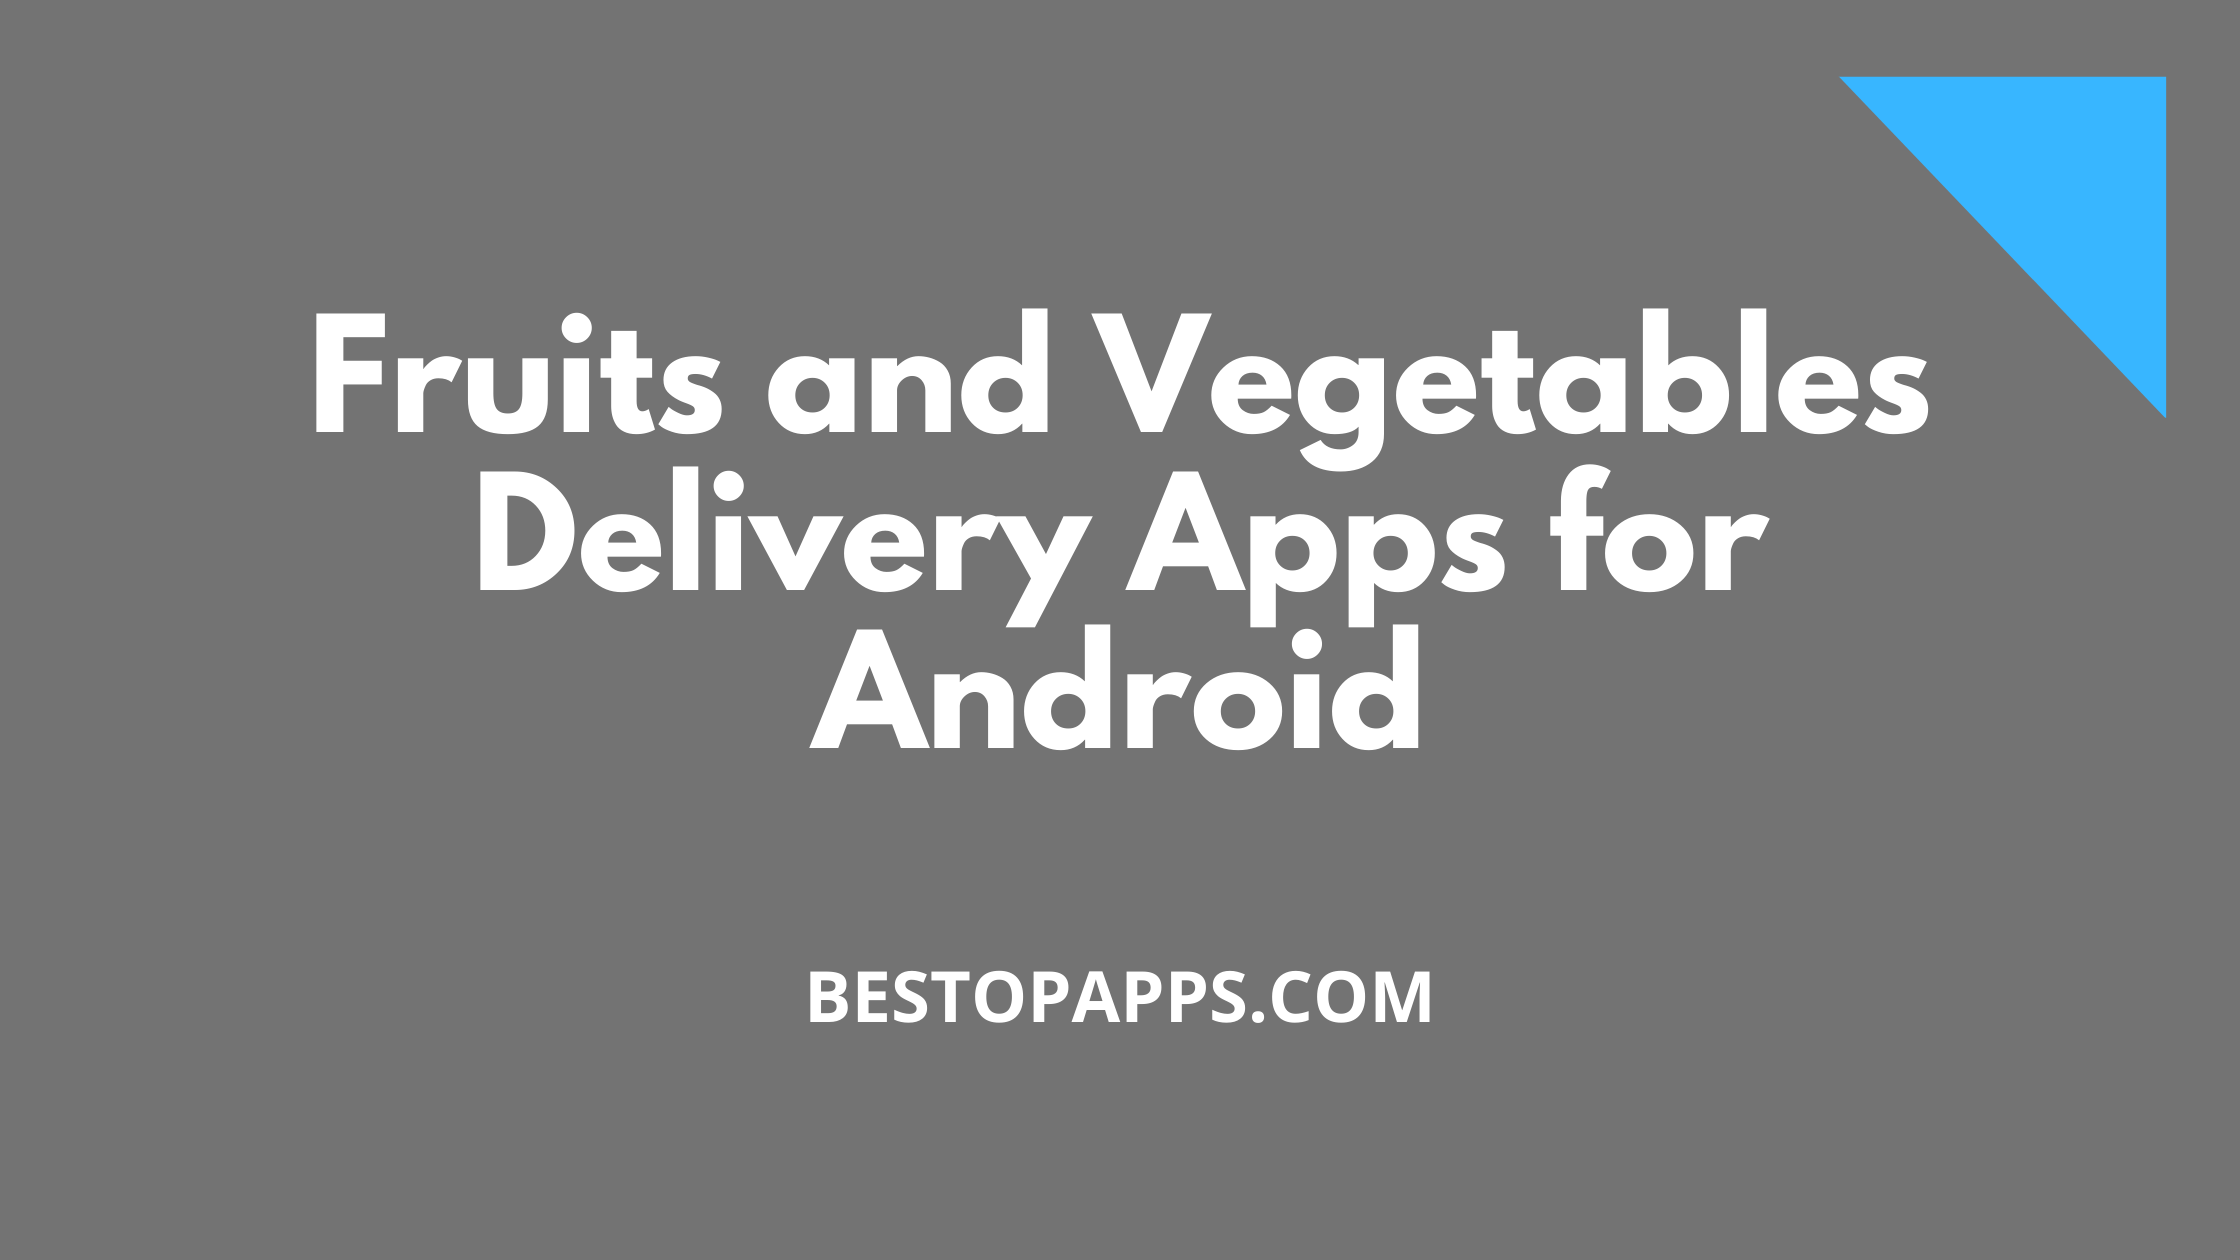 Fruits and Vegetables Delivery Apps for Android